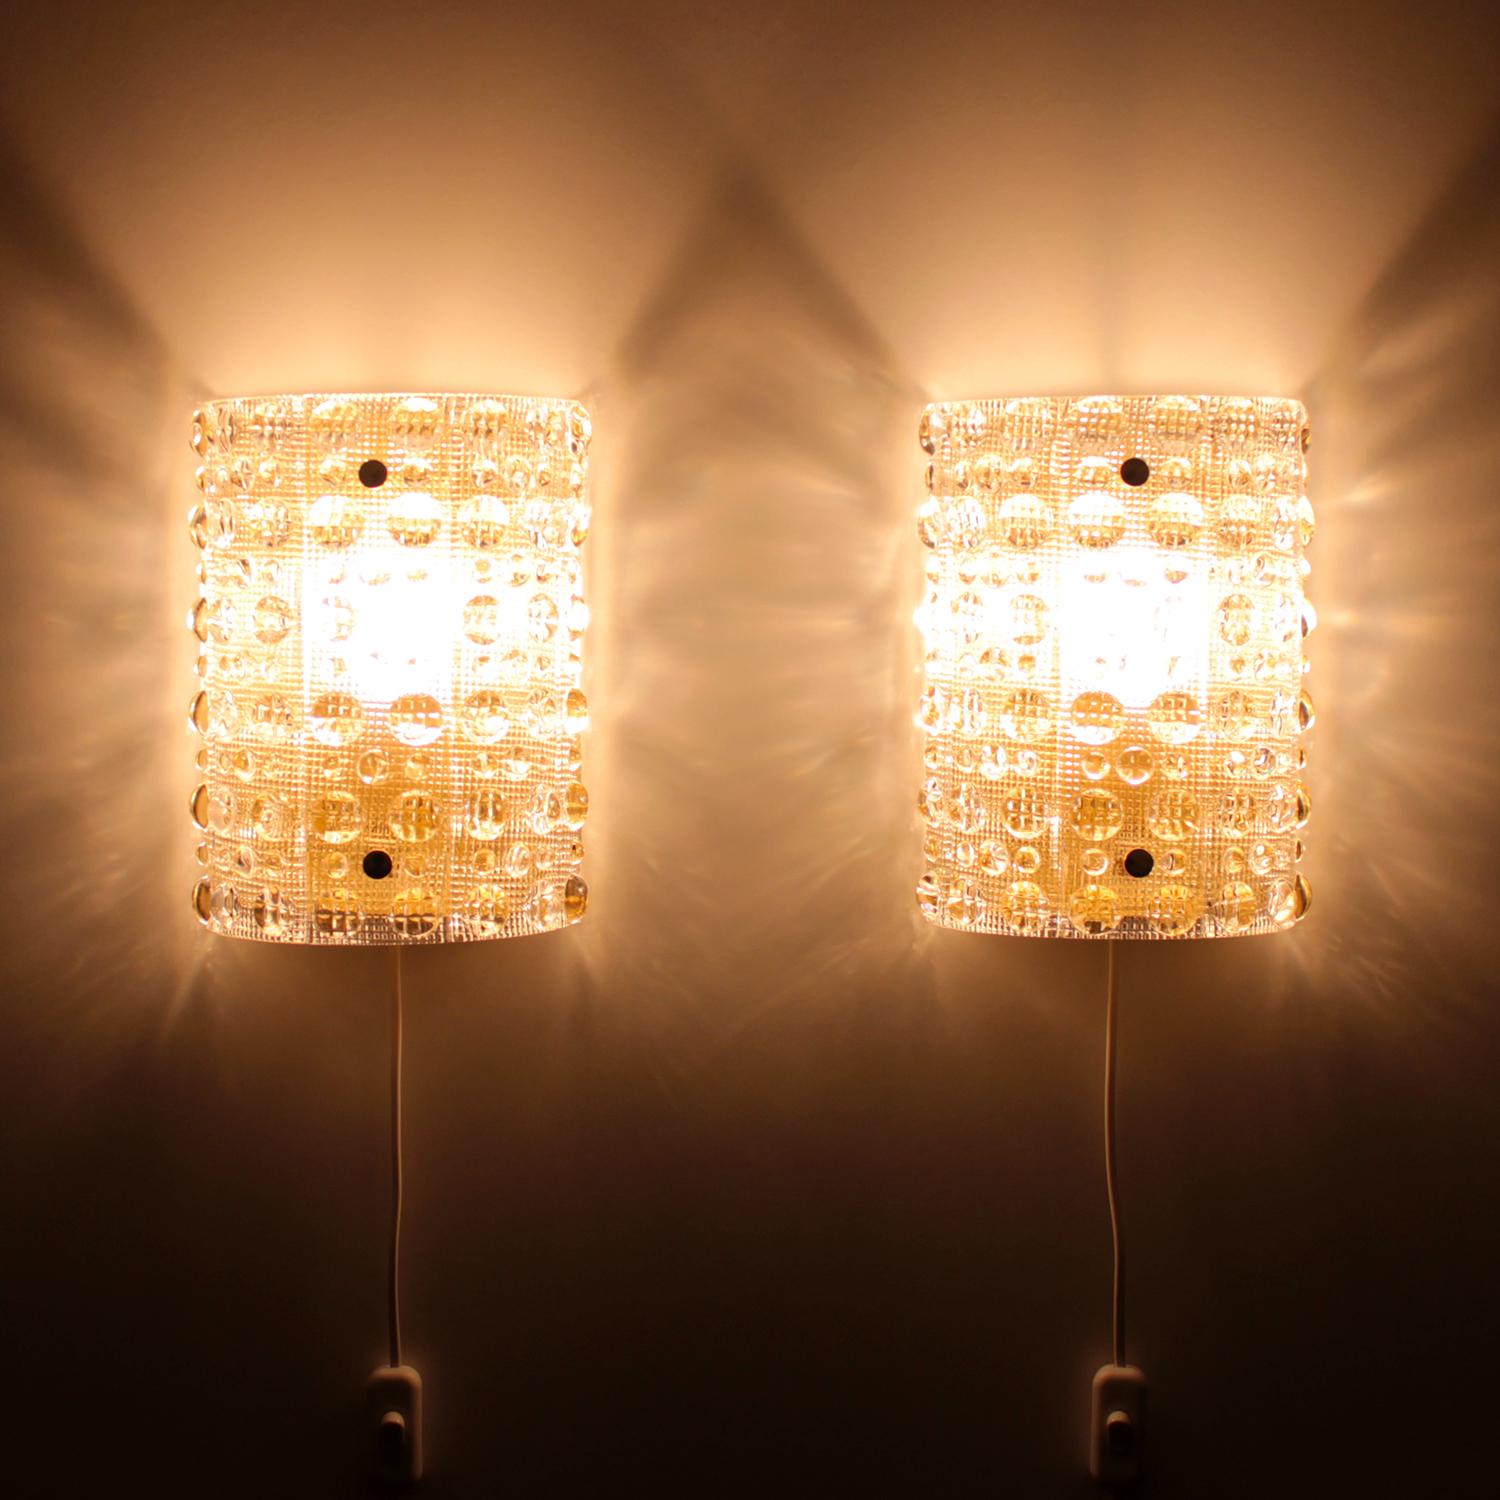 Crystal Sconces, pair of wall lamps by Carl Fagerlund for Orrefors in the late 1950s-early 1960s - absolutely gorgeous and rare pair of crystal wall lights.

A pair of magnificent crystal glass sconces that oozes Swedish glass design at its best -